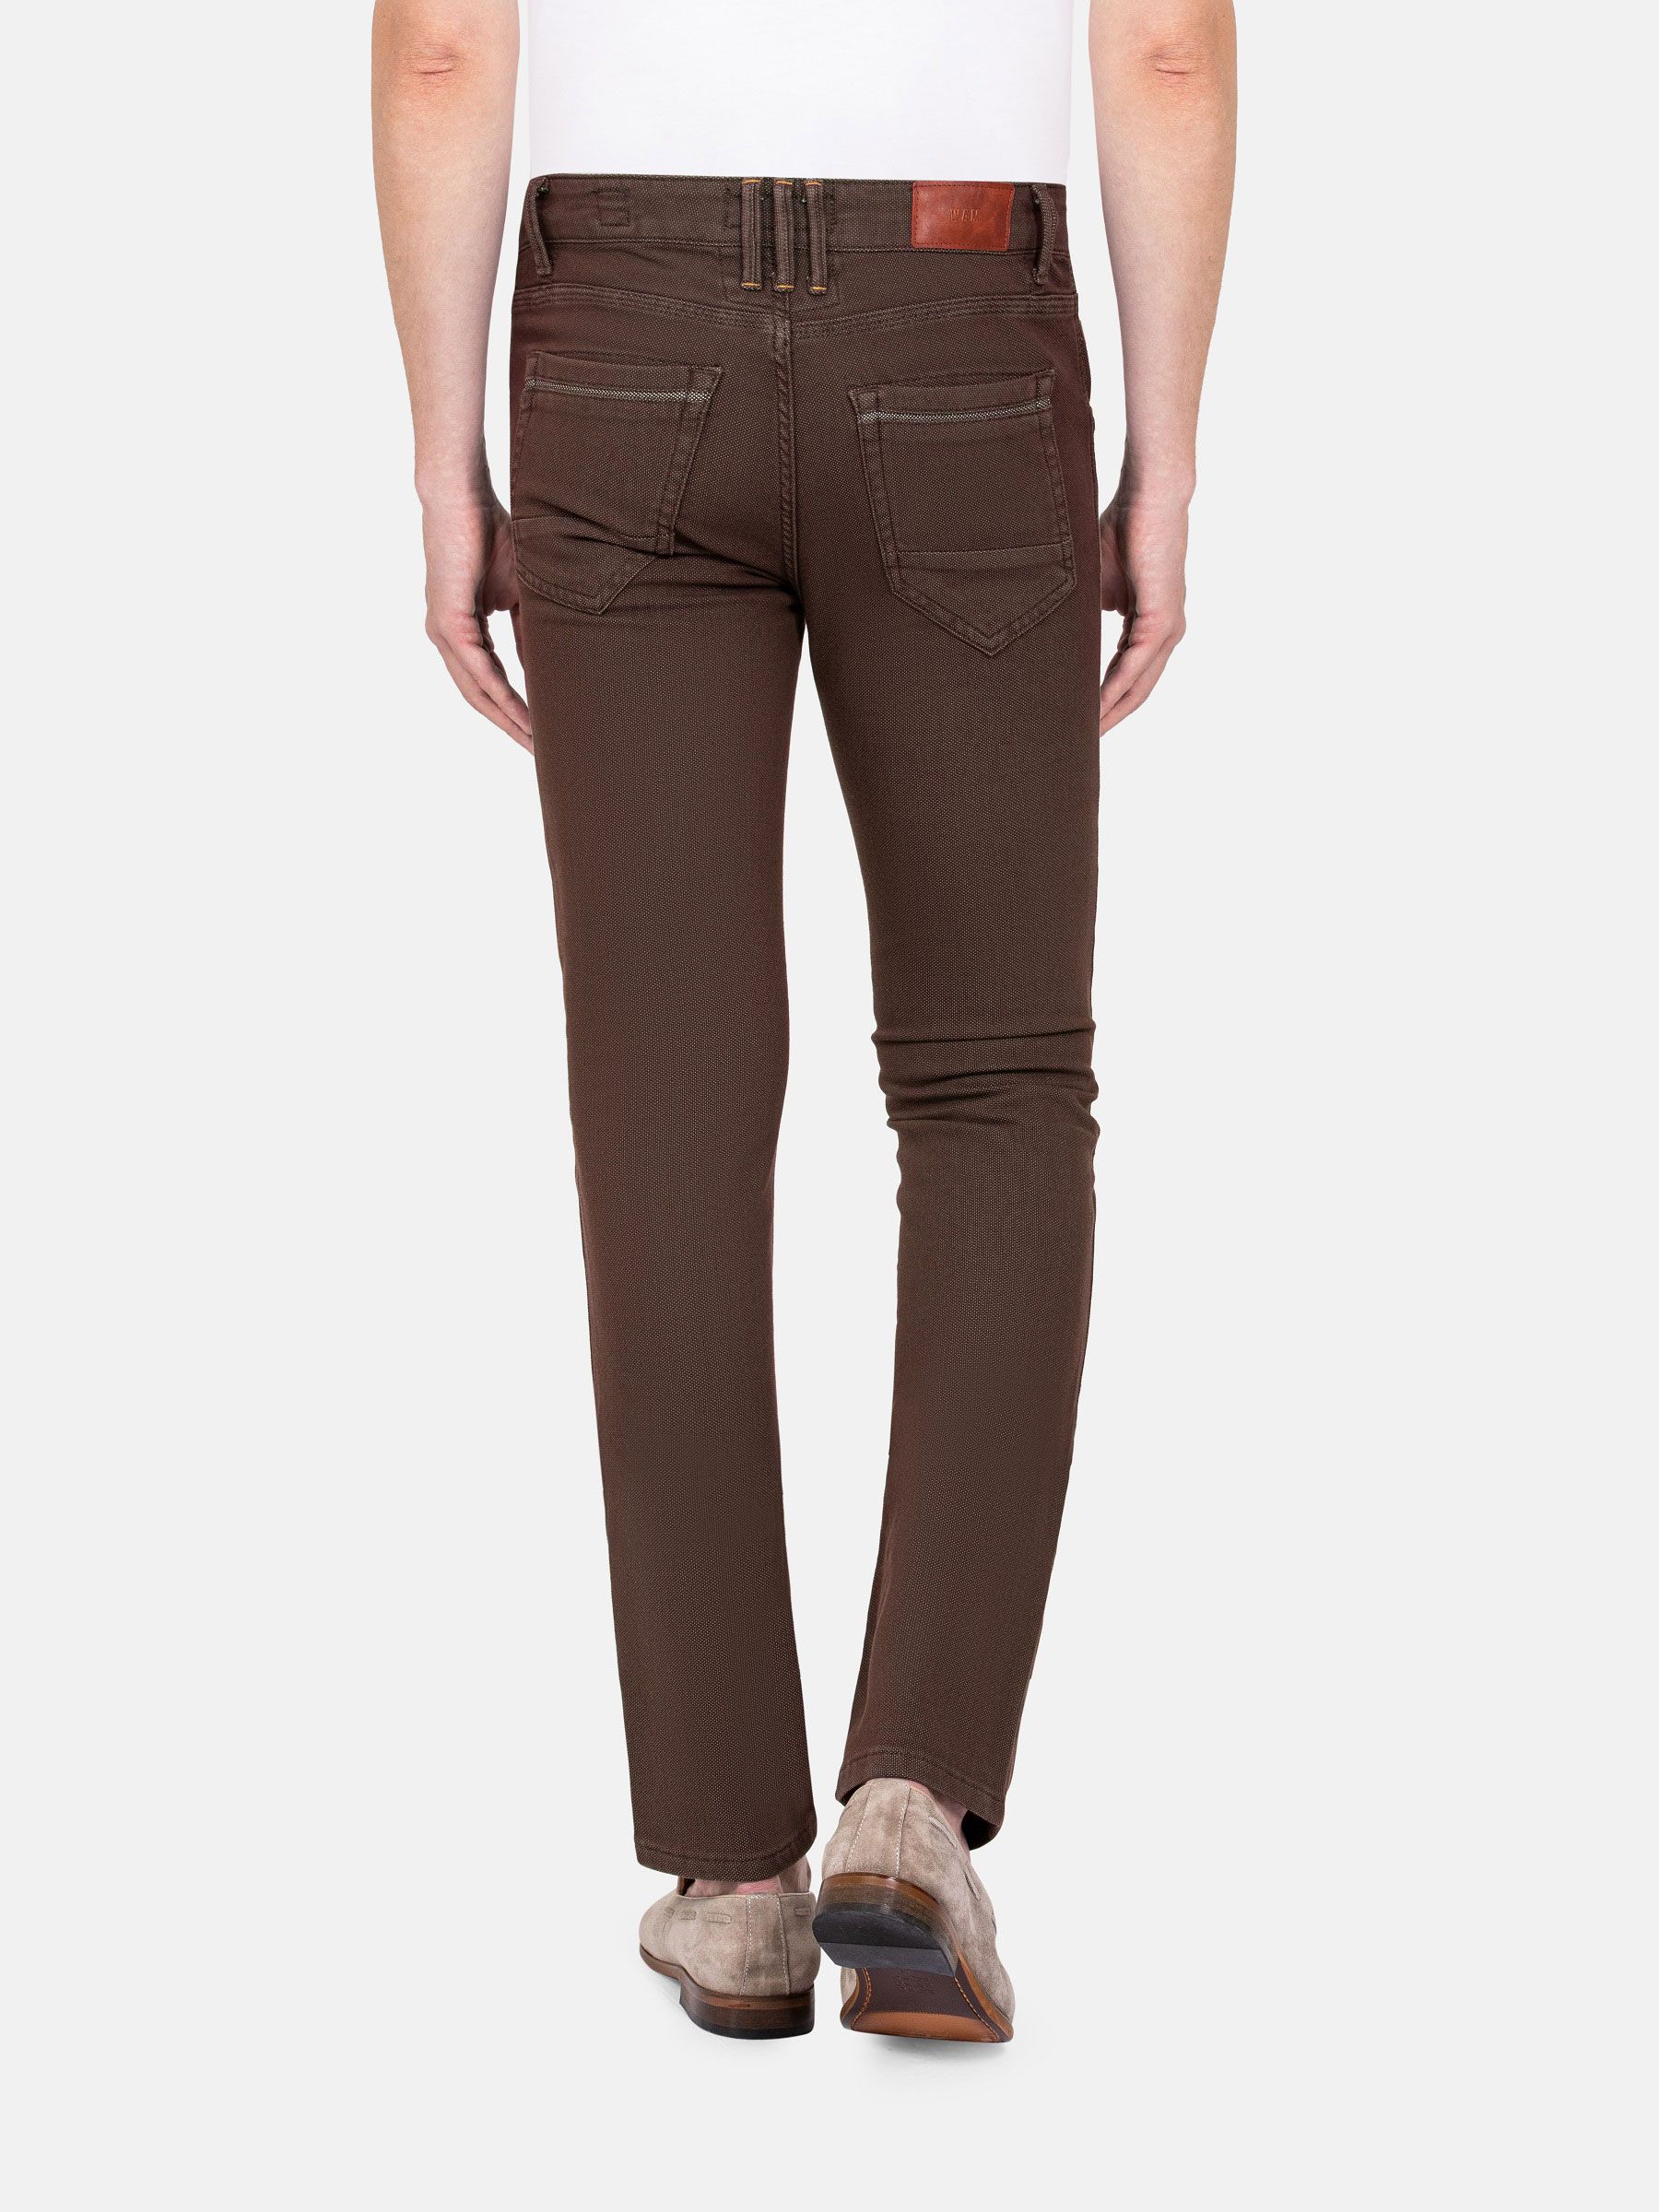 CCS Original Relaxed Denim Jeans - Overdyed Brown